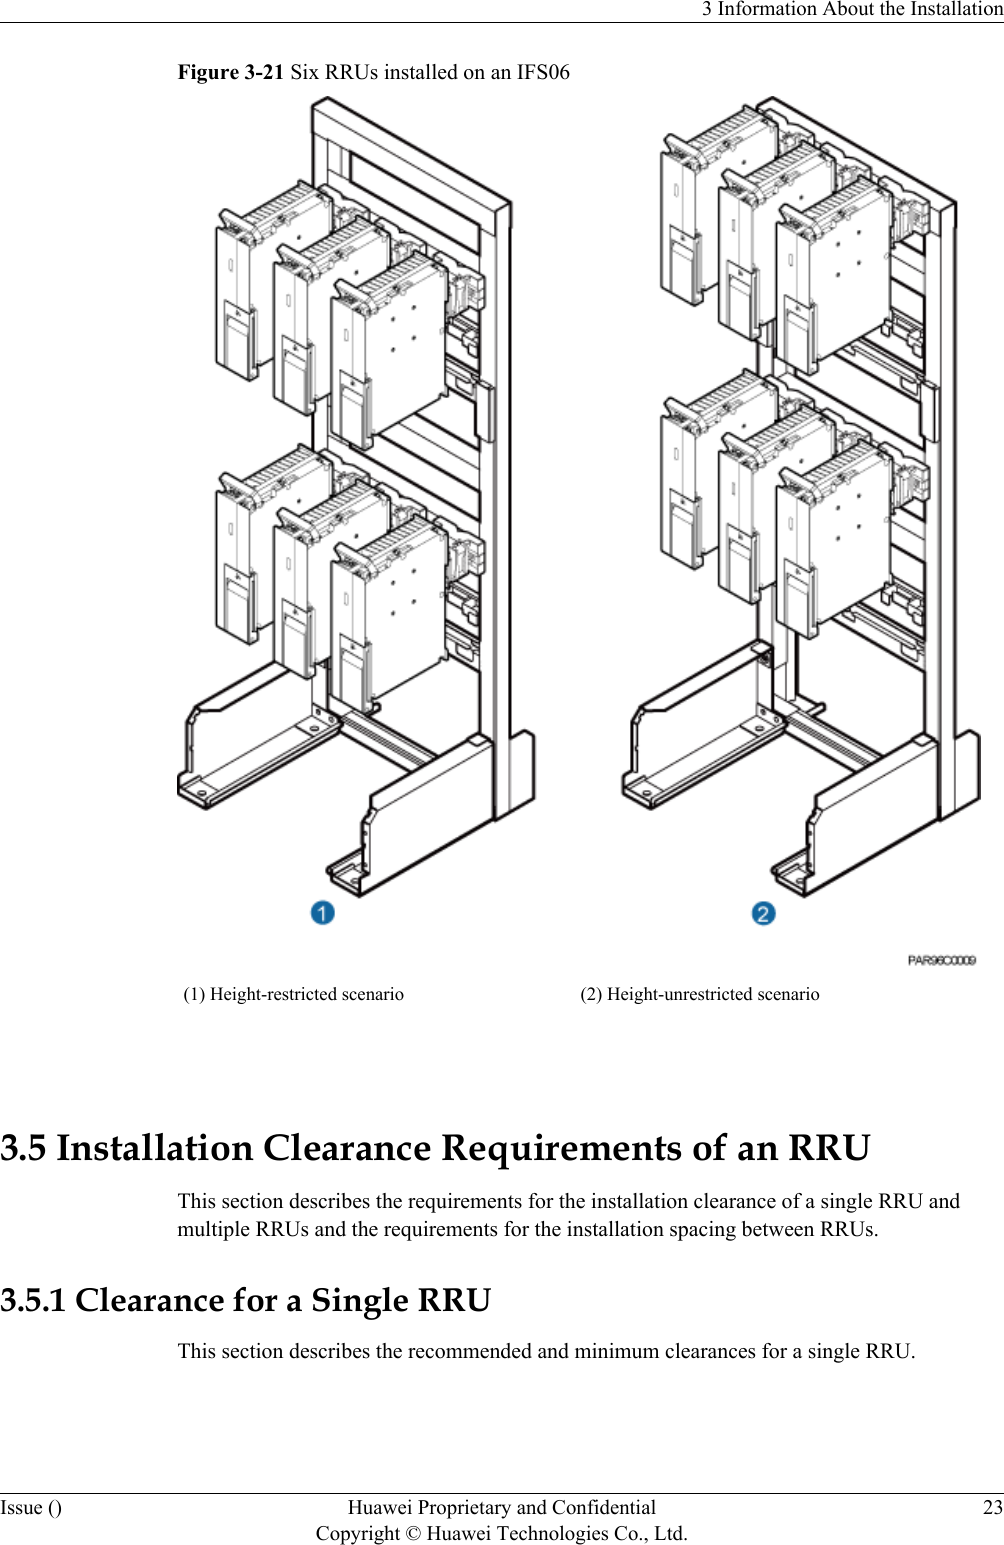 Figure 3-21 Six RRUs installed on an IFS06(1) Height-restricted scenario (2) Height-unrestricted scenario 3.5 Installation Clearance Requirements of an RRUThis section describes the requirements for the installation clearance of a single RRU andmultiple RRUs and the requirements for the installation spacing between RRUs.3.5.1 Clearance for a Single RRUThis section describes the recommended and minimum clearances for a single RRU.3 Information About the InstallationIssue () Huawei Proprietary and ConfidentialCopyright © Huawei Technologies Co., Ltd.23